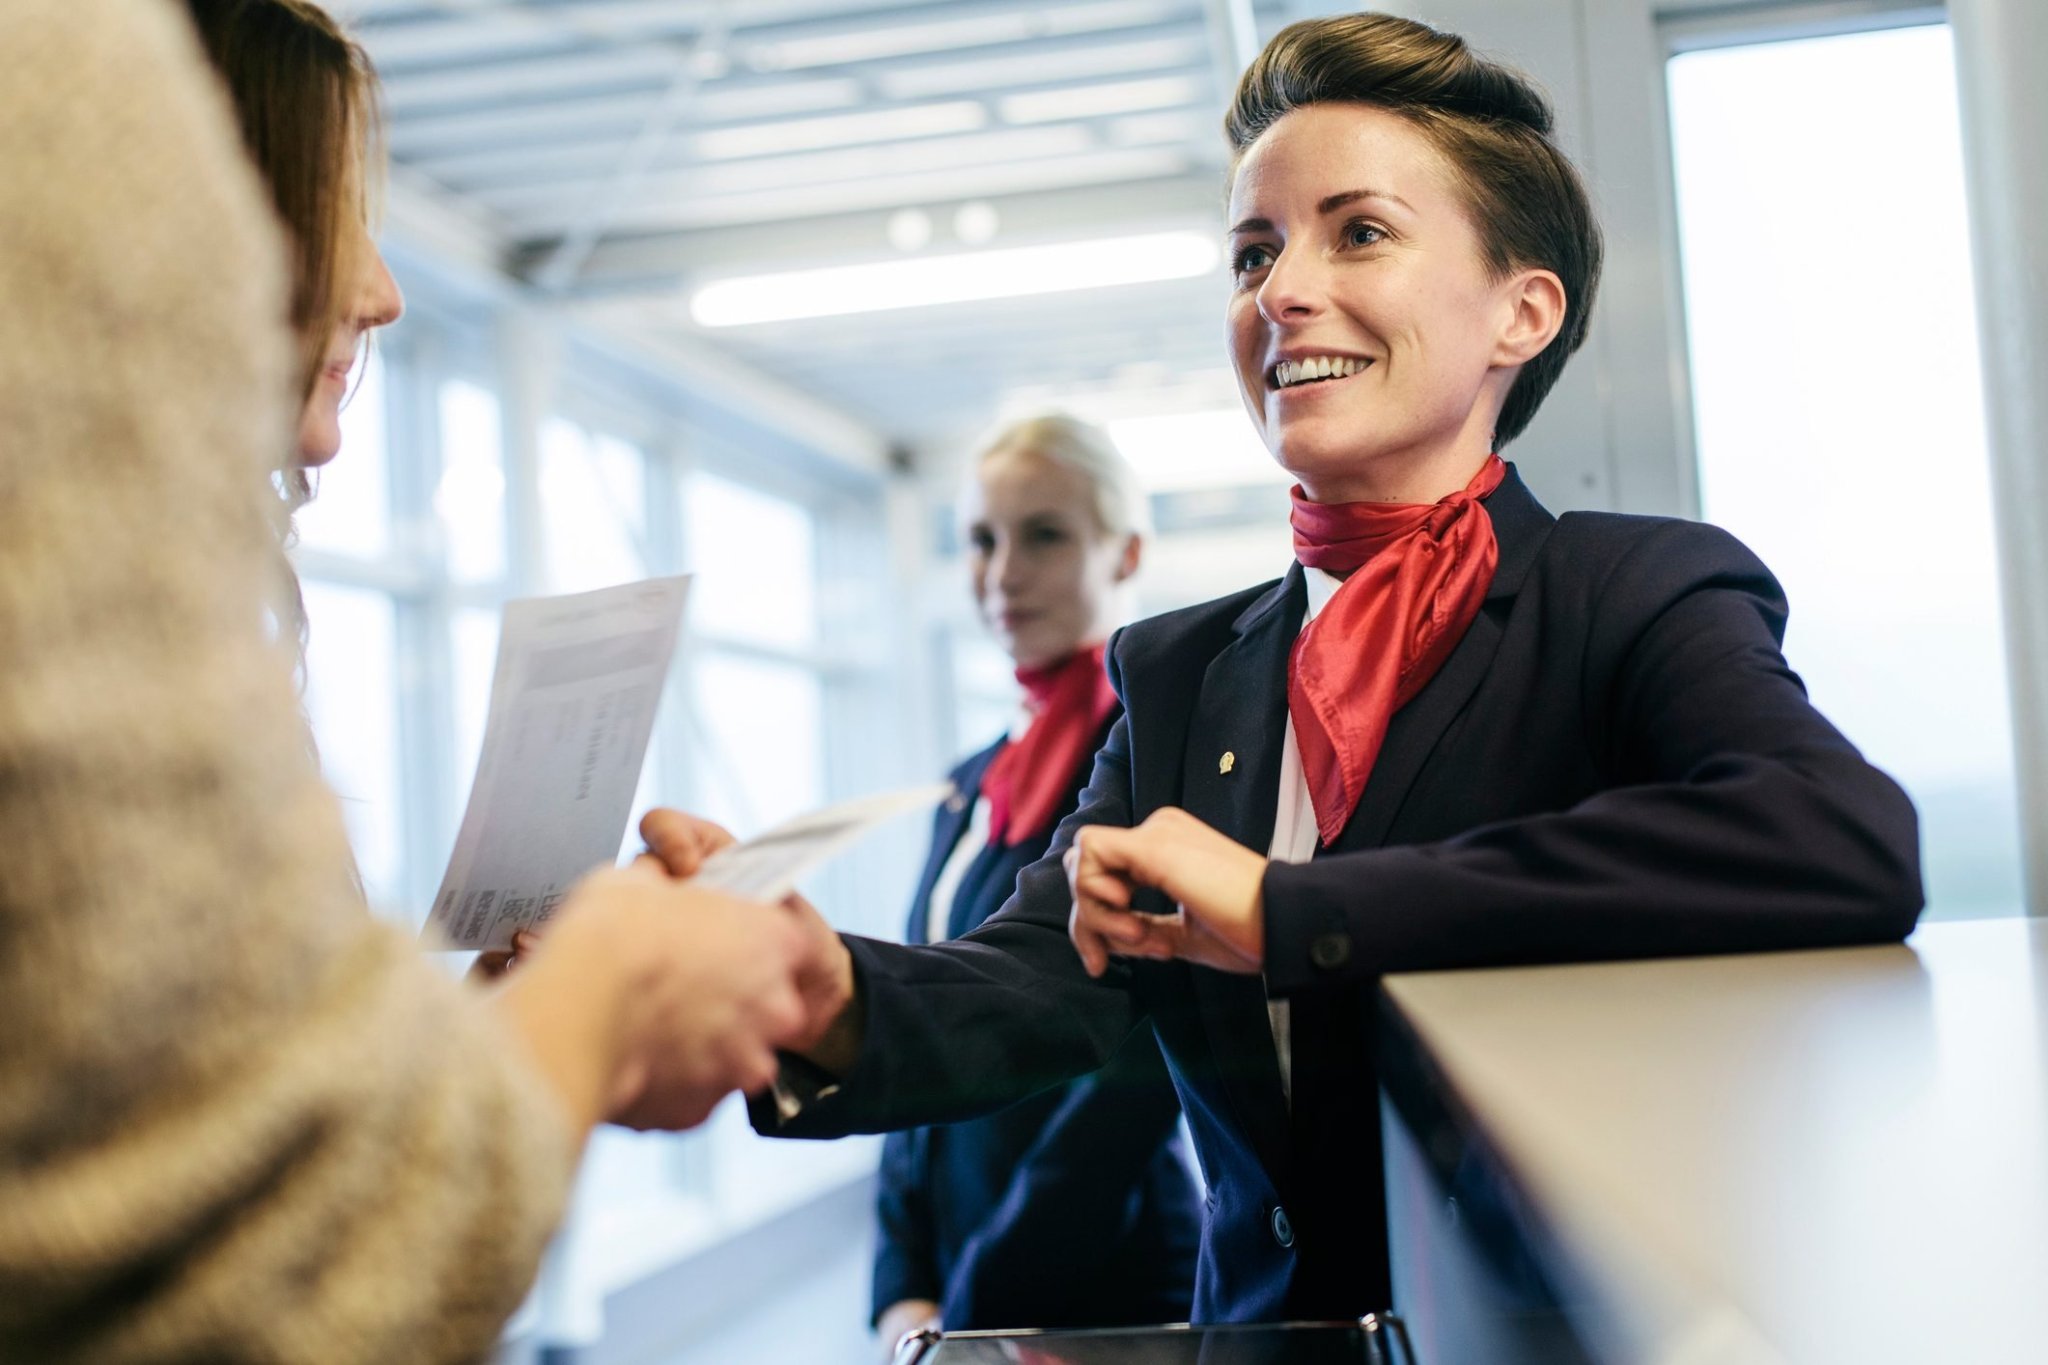 27 Things You Shouldn’t Say When Talking to a Flight Attendant